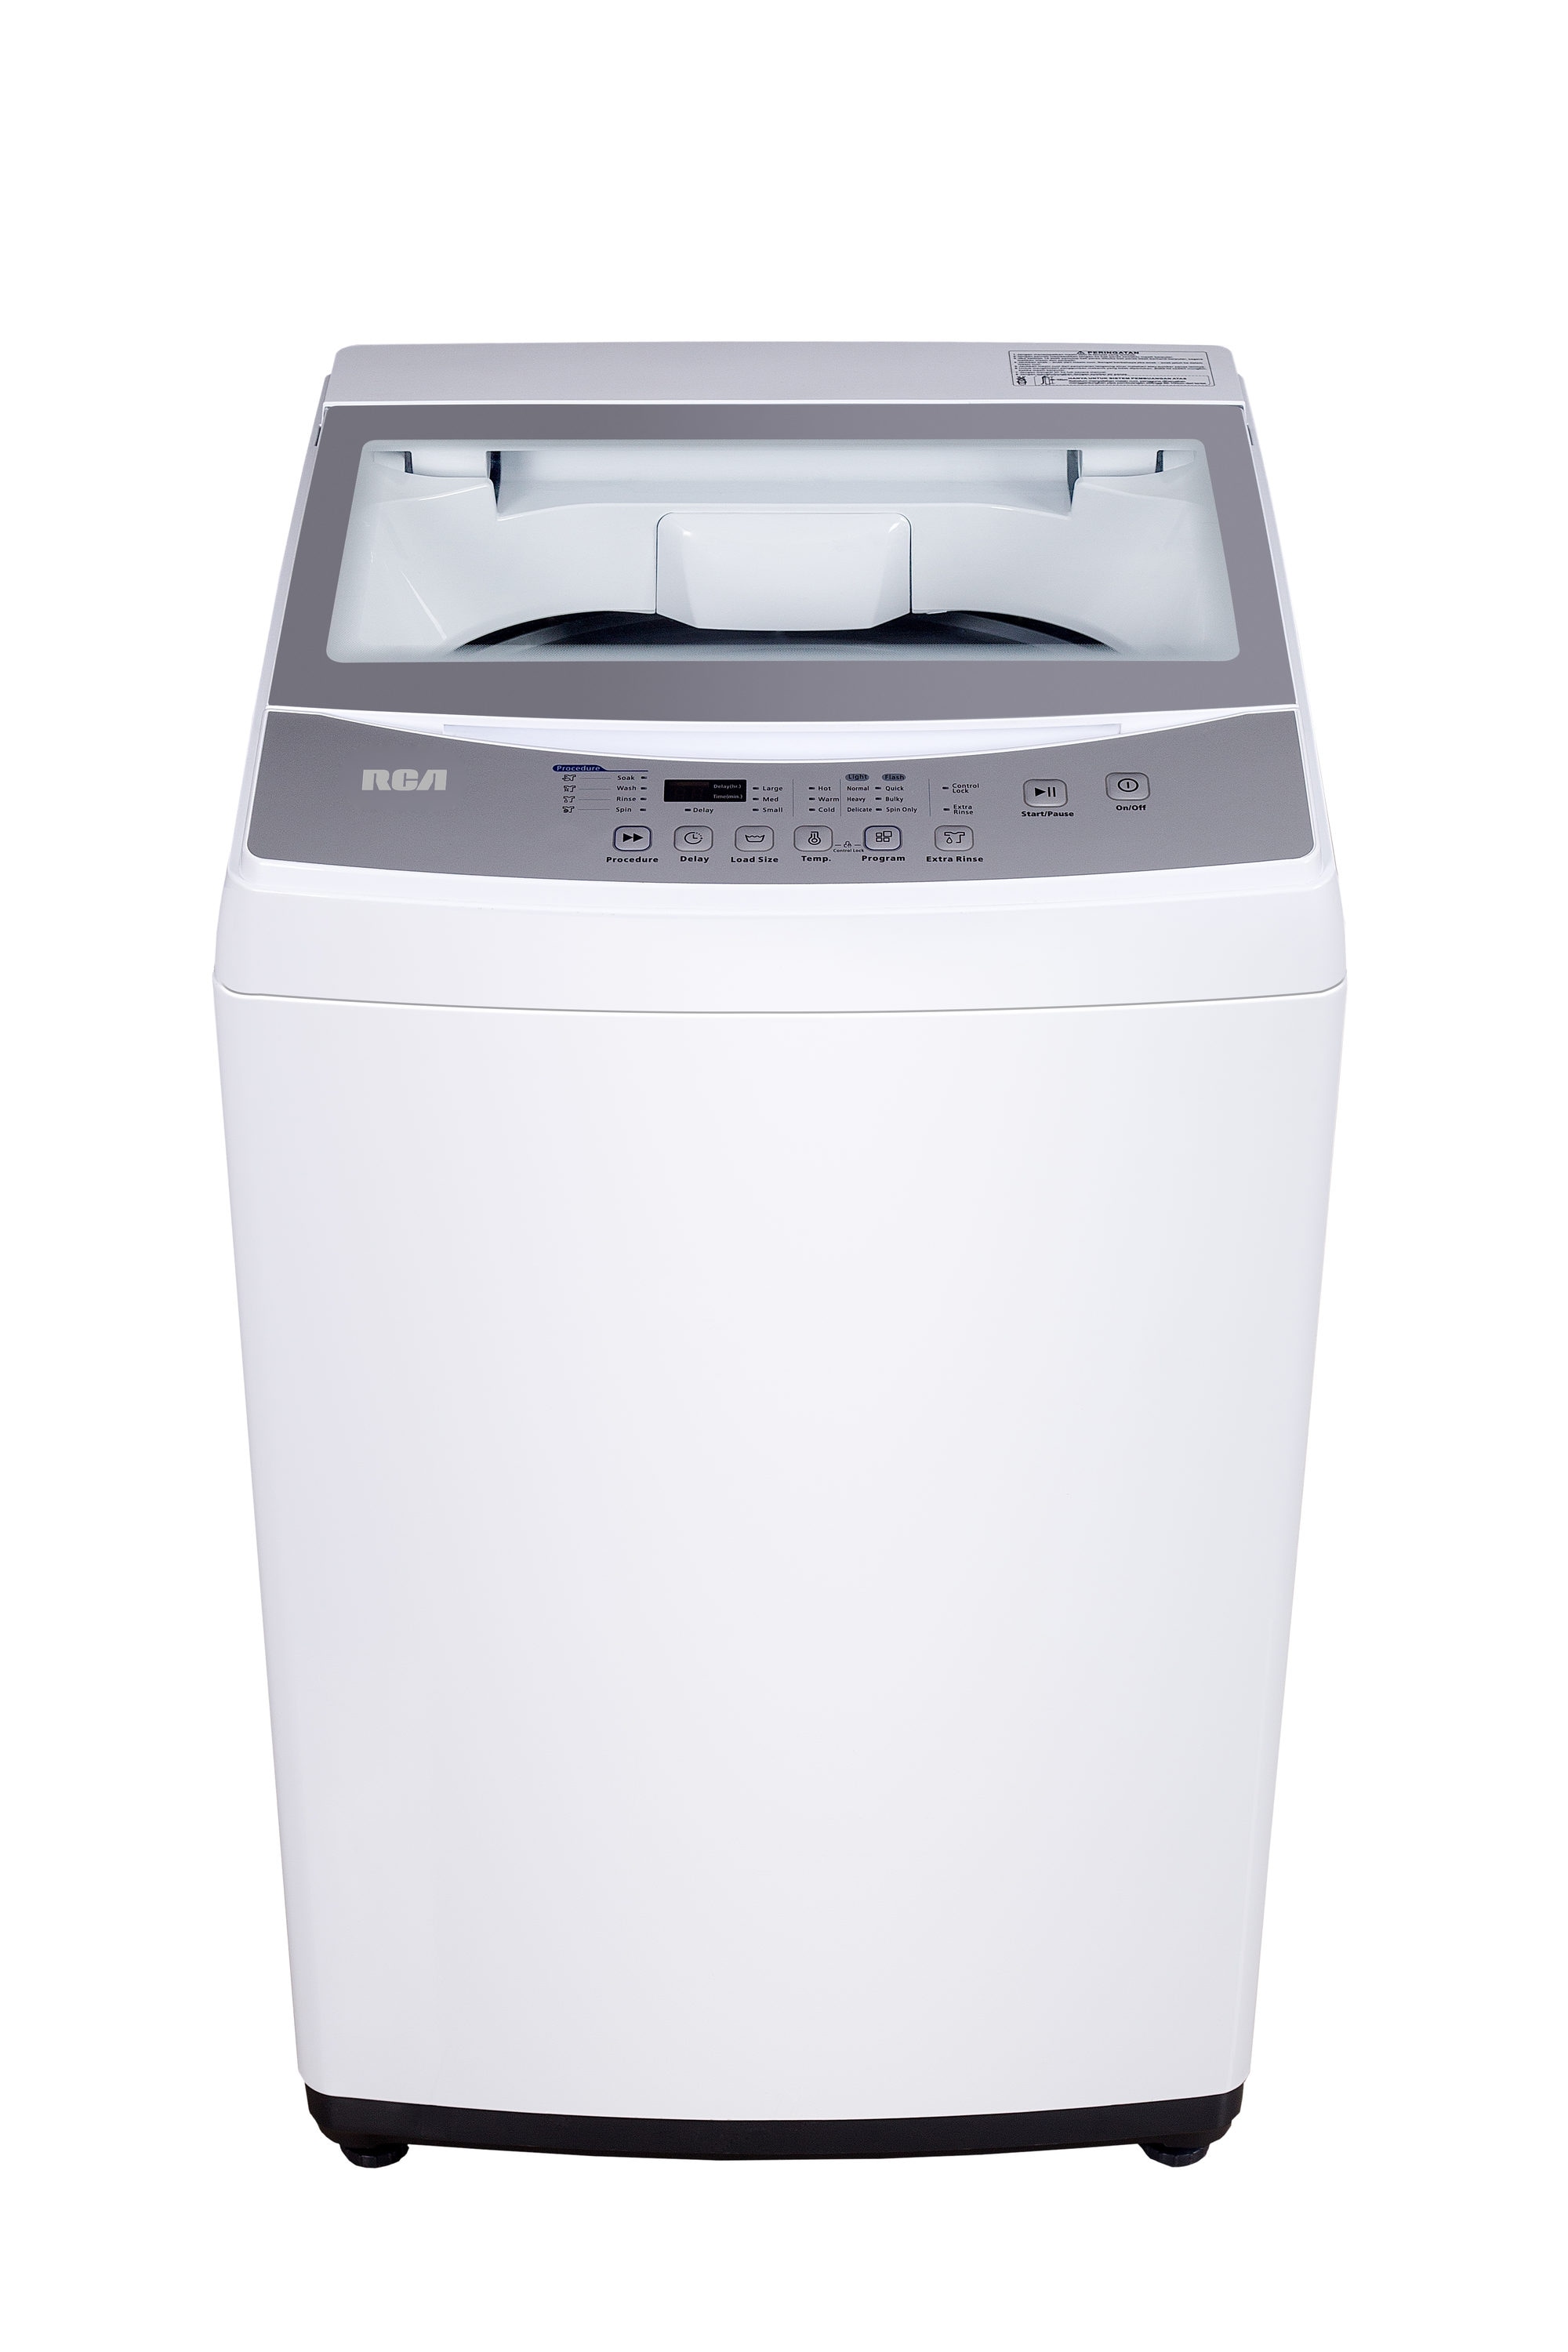 BLACK+DECKER BPWH84W Washer Portable Laundry, White, 0.84 Cu. Ft. & BCED26  Portable Dryer, Small, 4 Modes, Load Volume 8.8 lbs, White